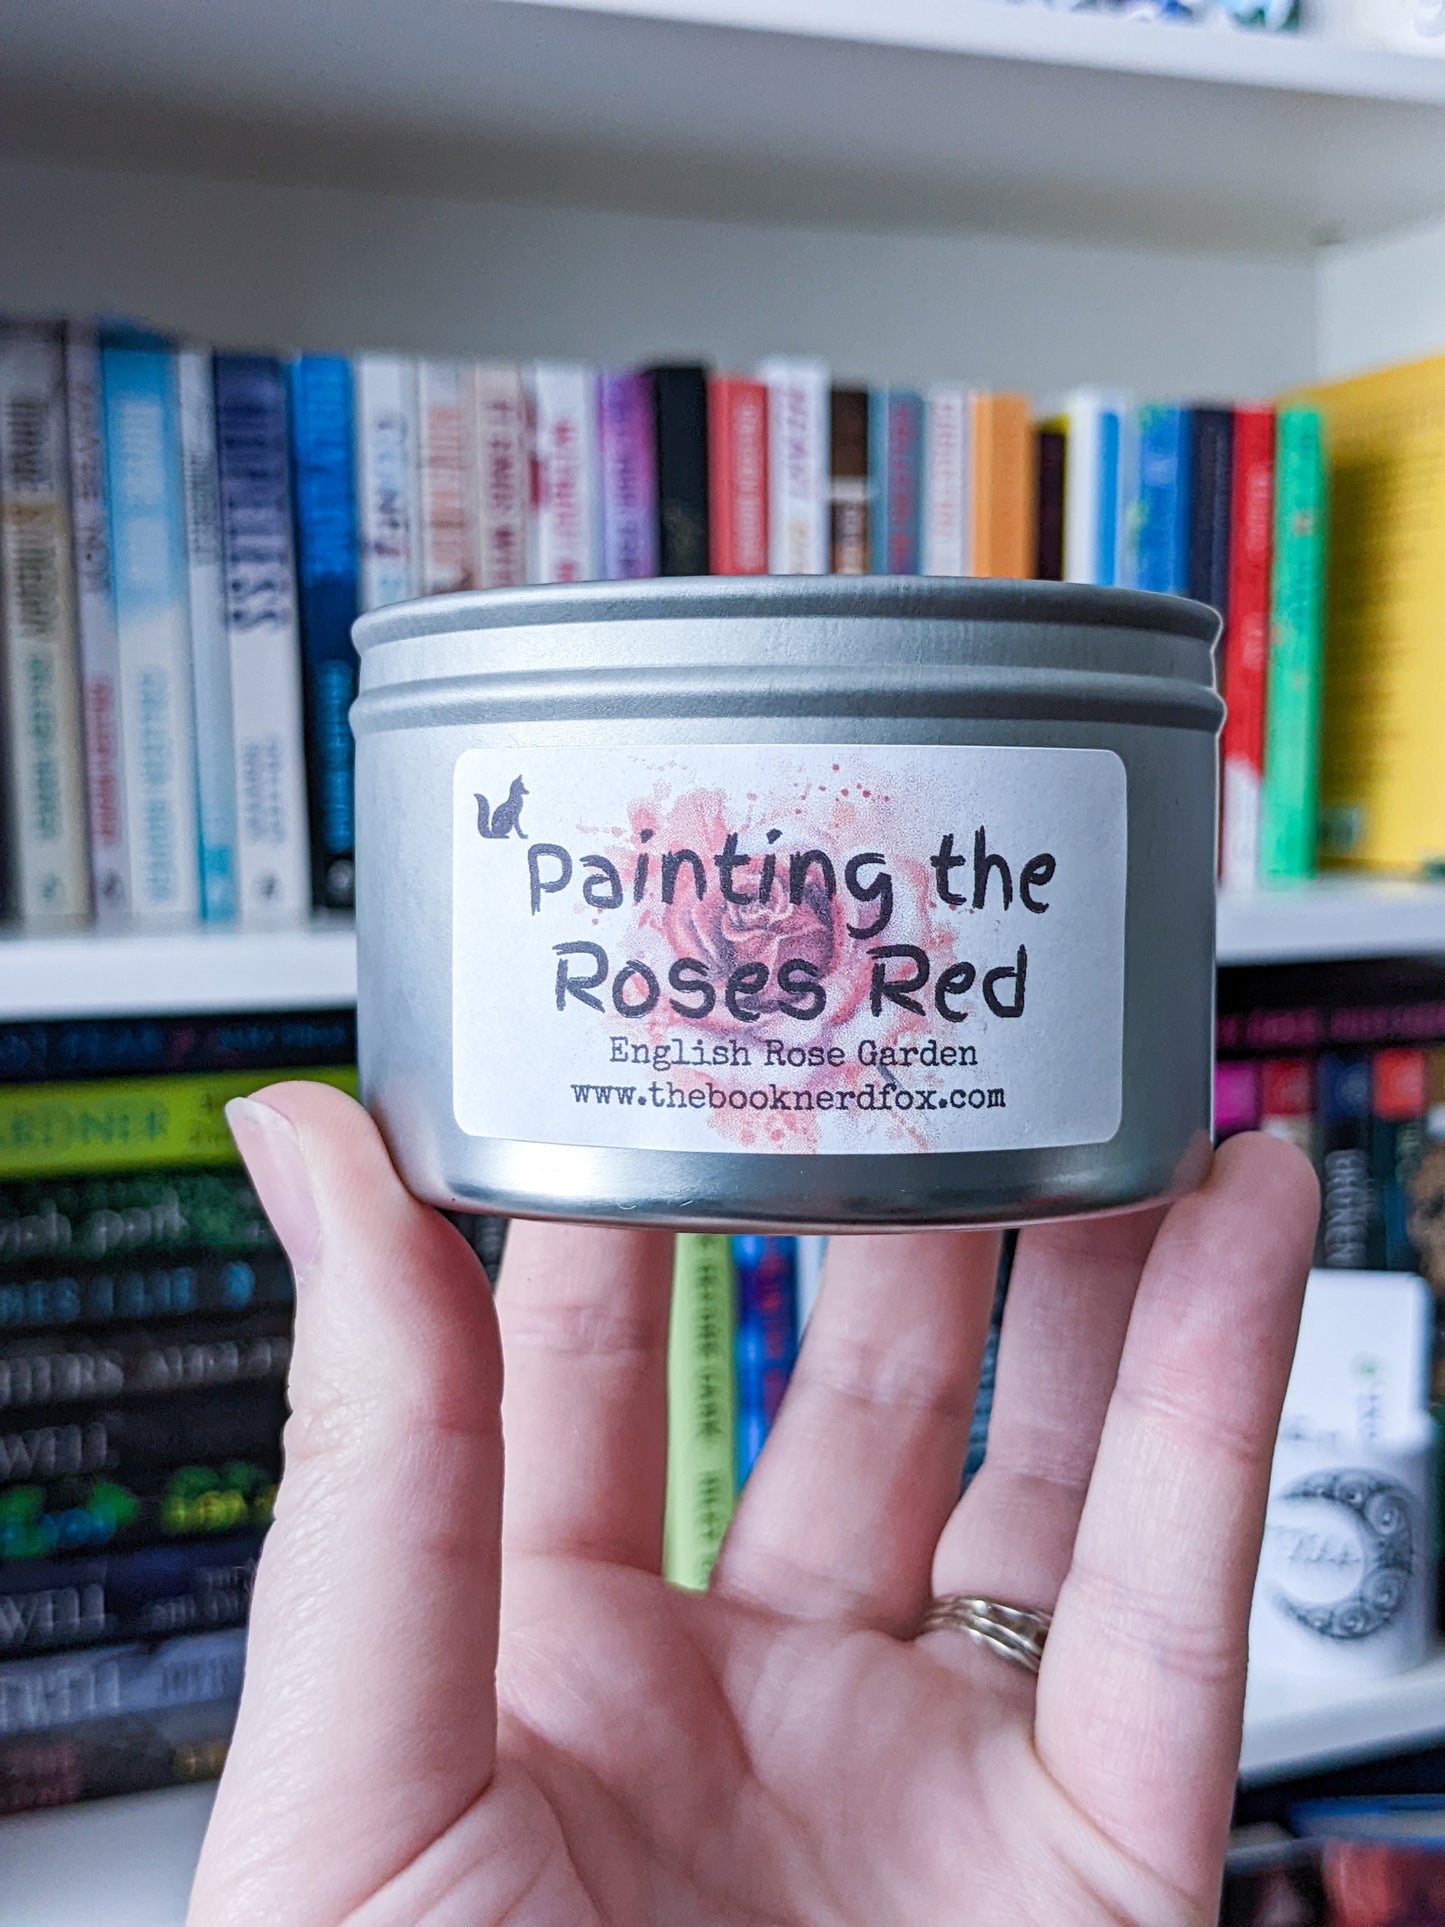 Painting the Roses Red - English Rose Garden